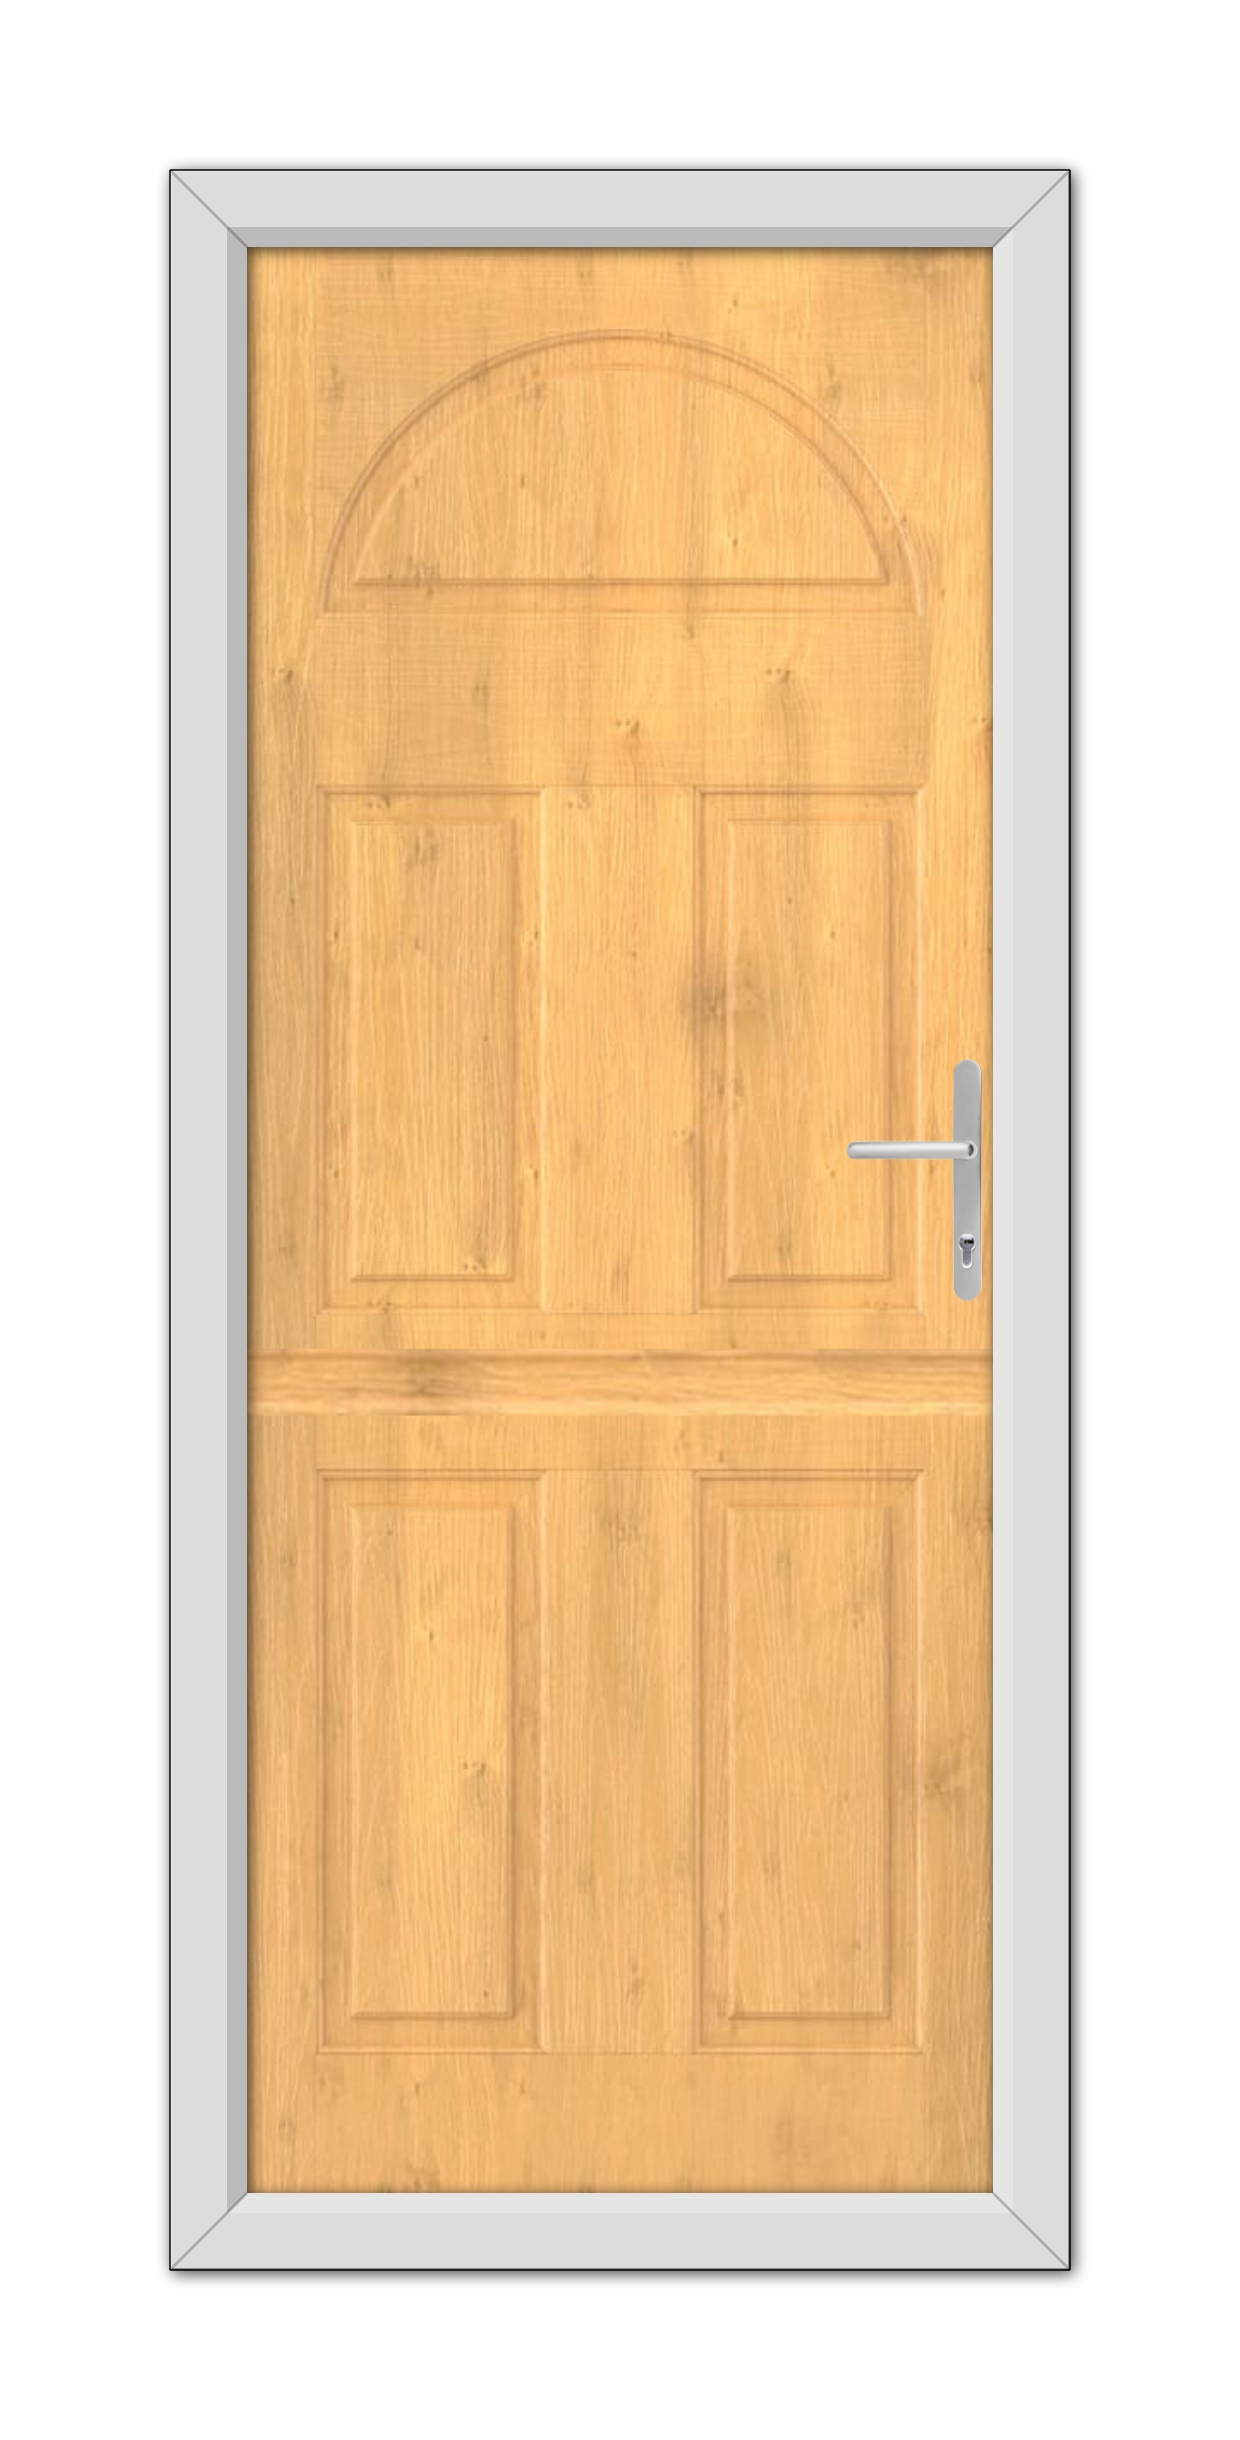 An Irish Oak Winslow Solid Stable Composite Door 48mm Timber Core with a silver handle set within a gray frame, featuring a top arched panel design.